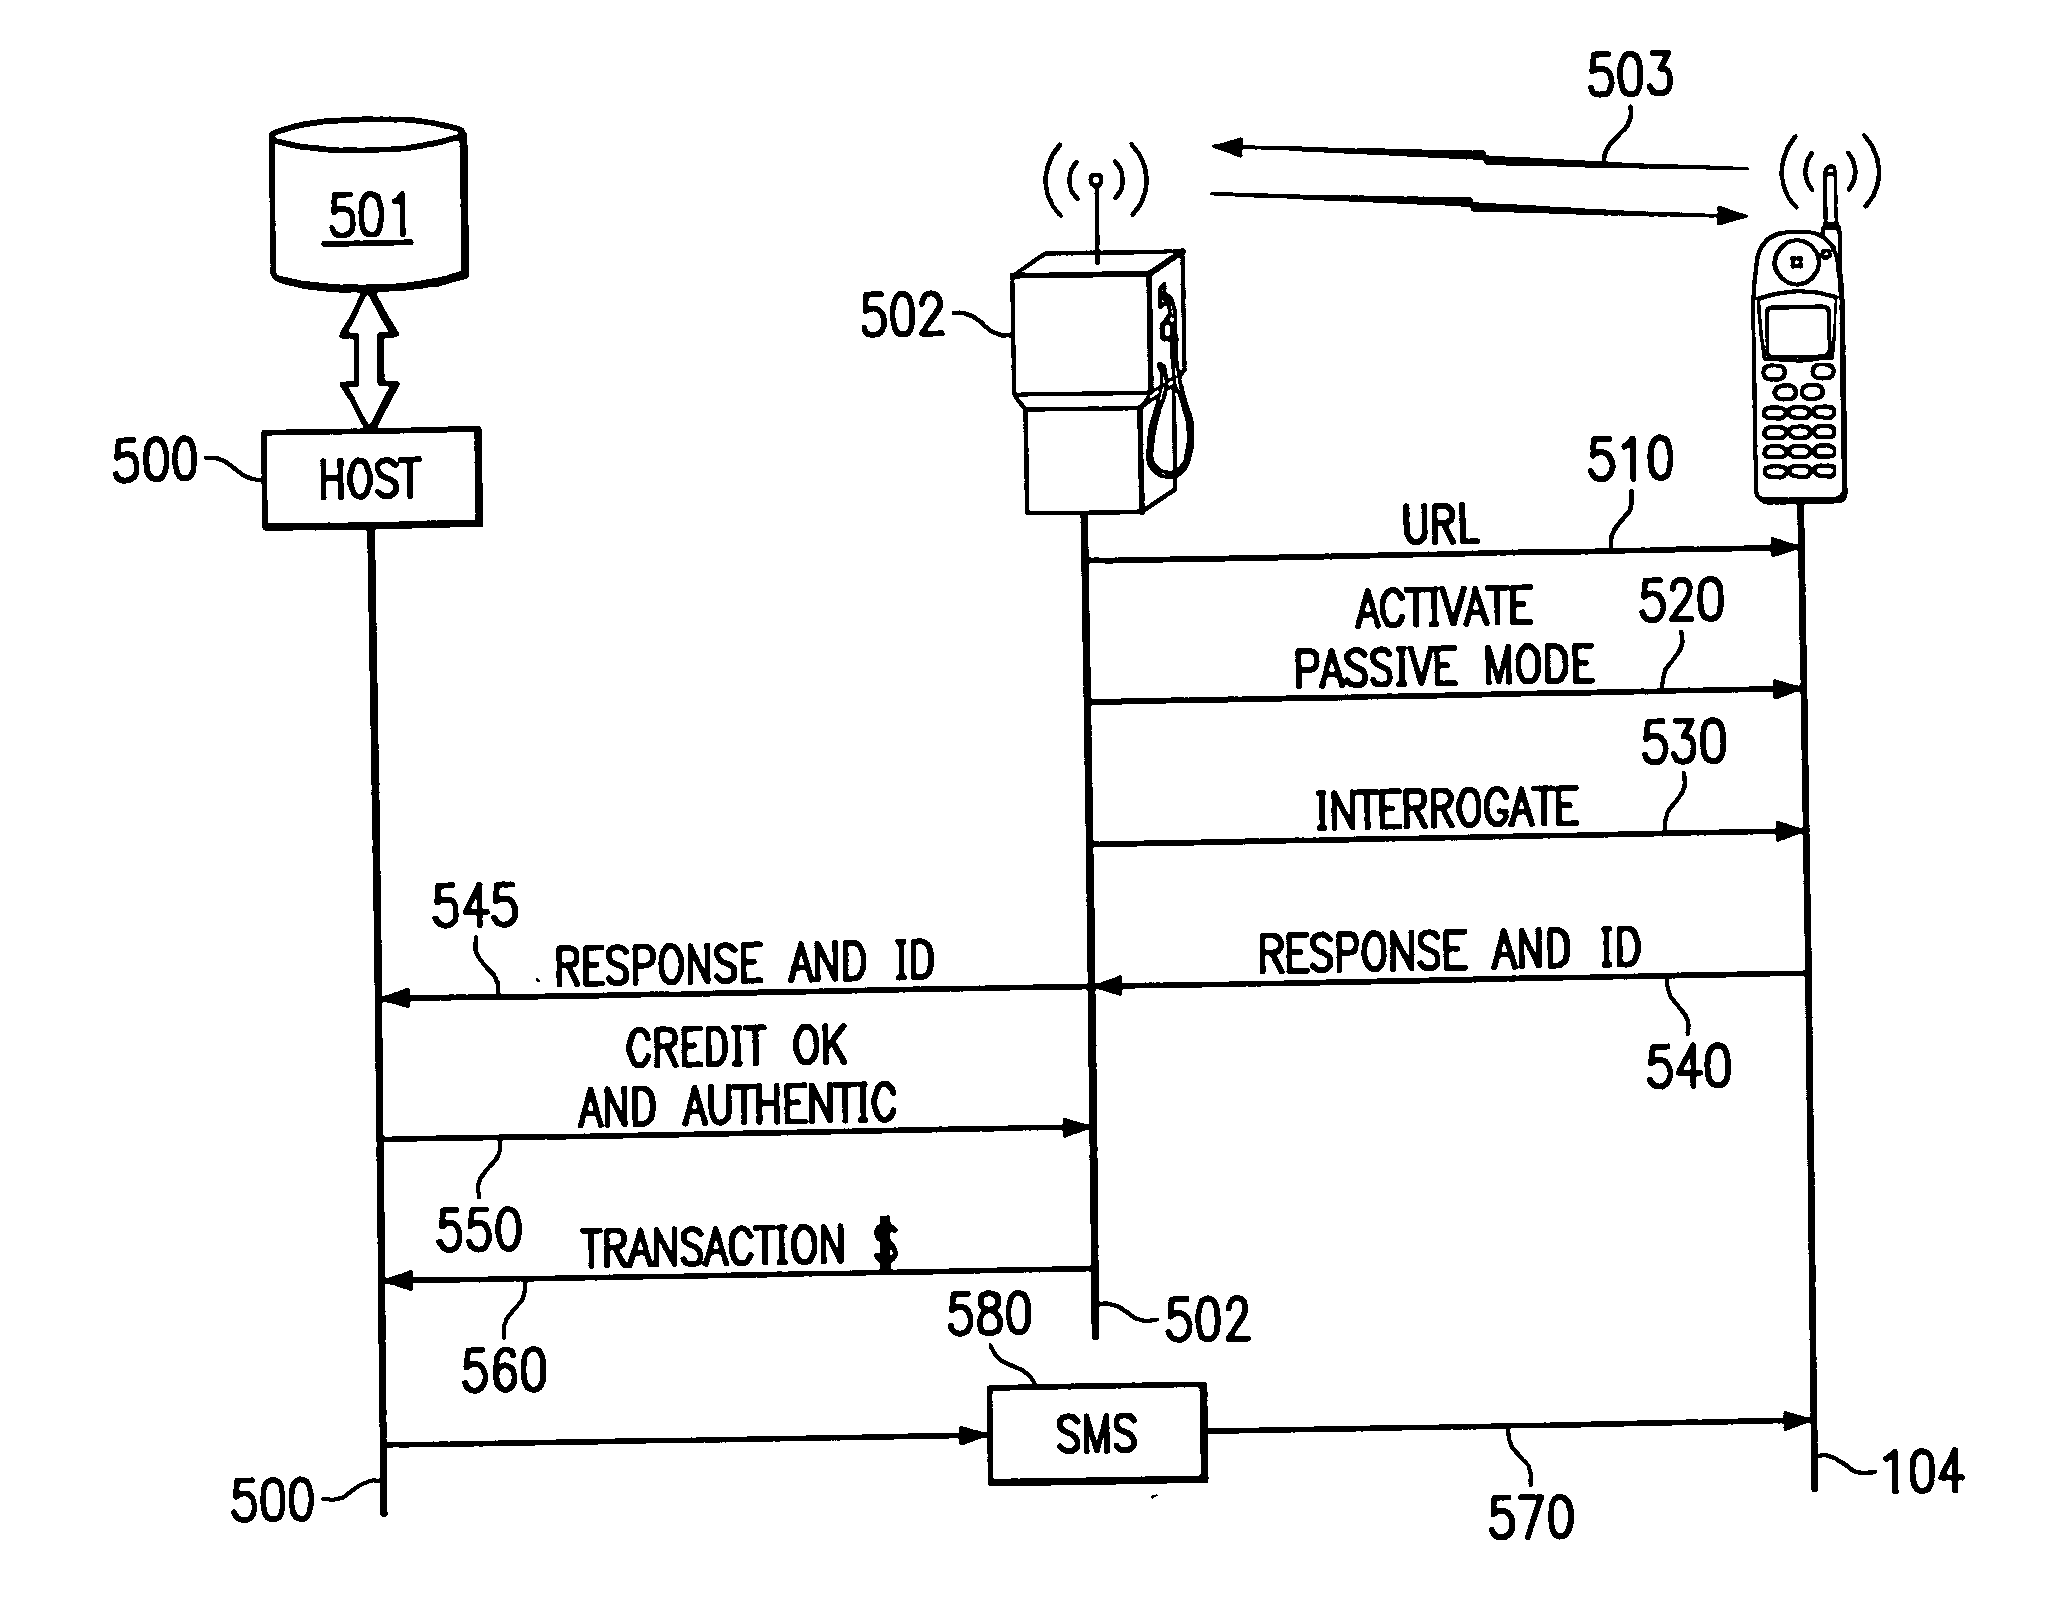 System and method of making payments using an electronic device cover with embedded transponder